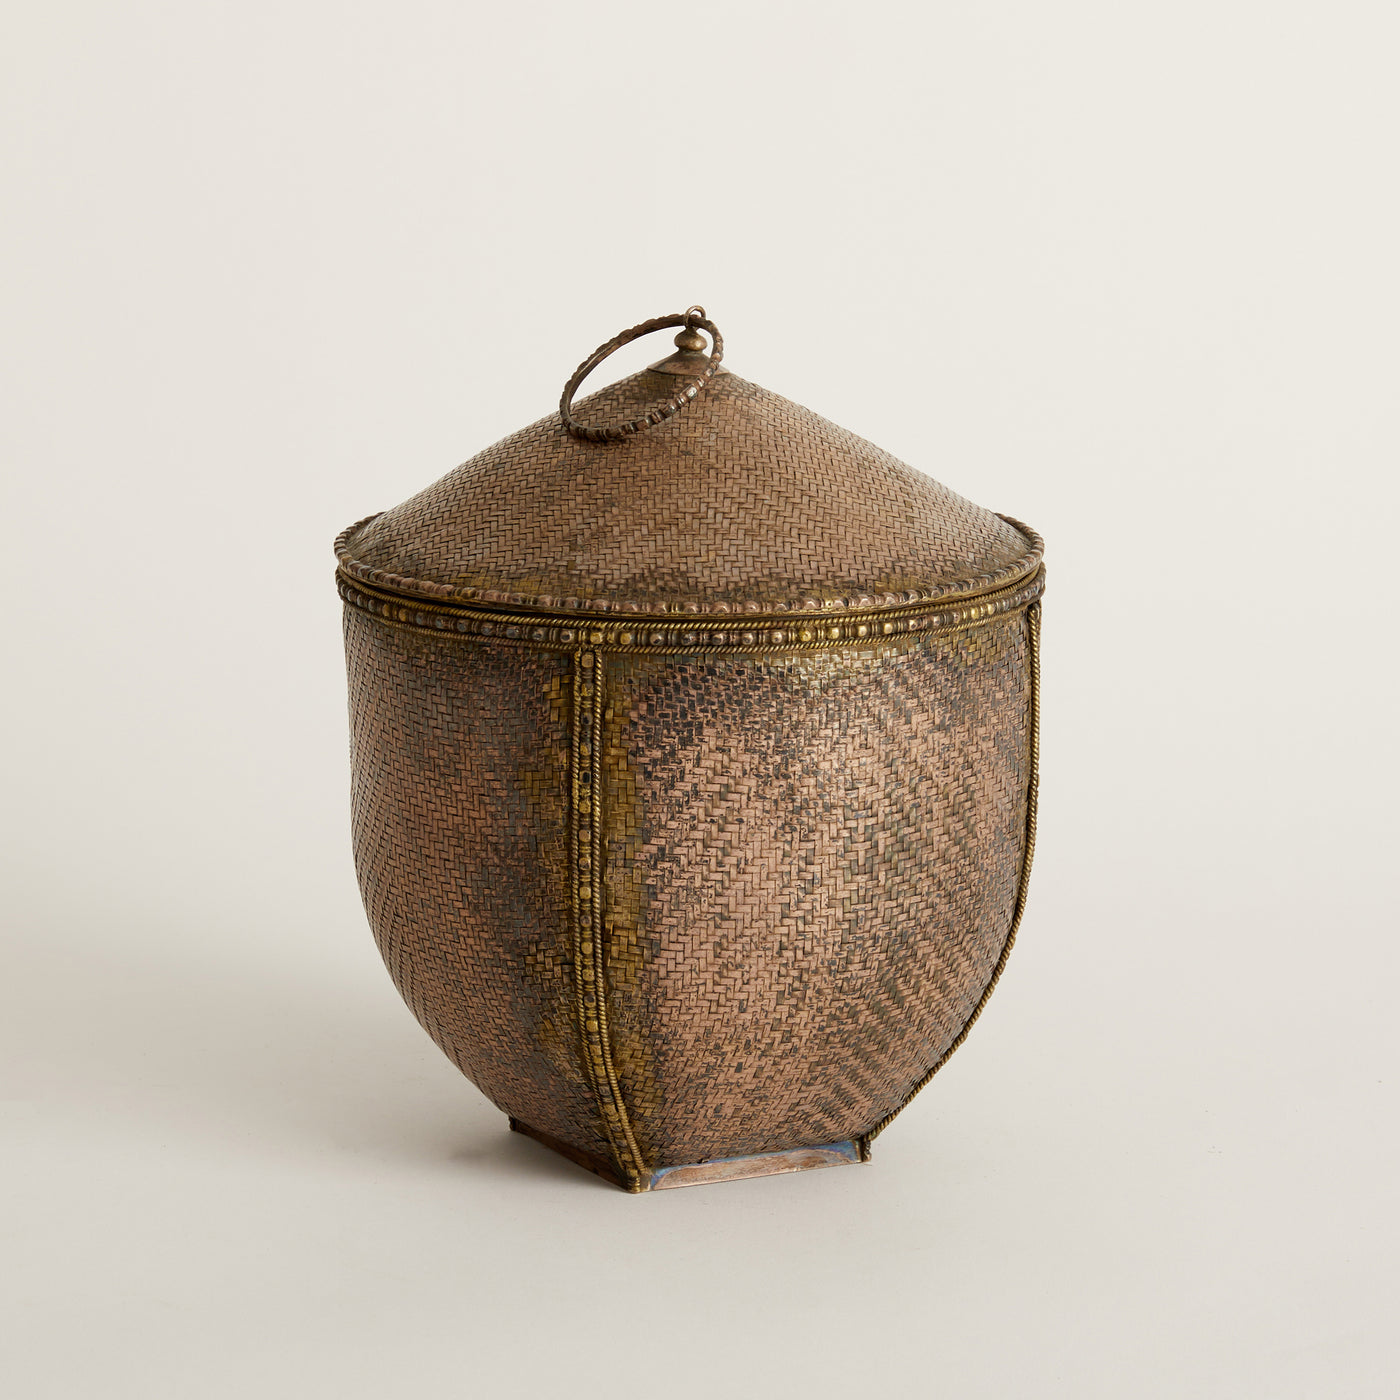 19th c. Japanese Silver Woven Basket w/ Lid